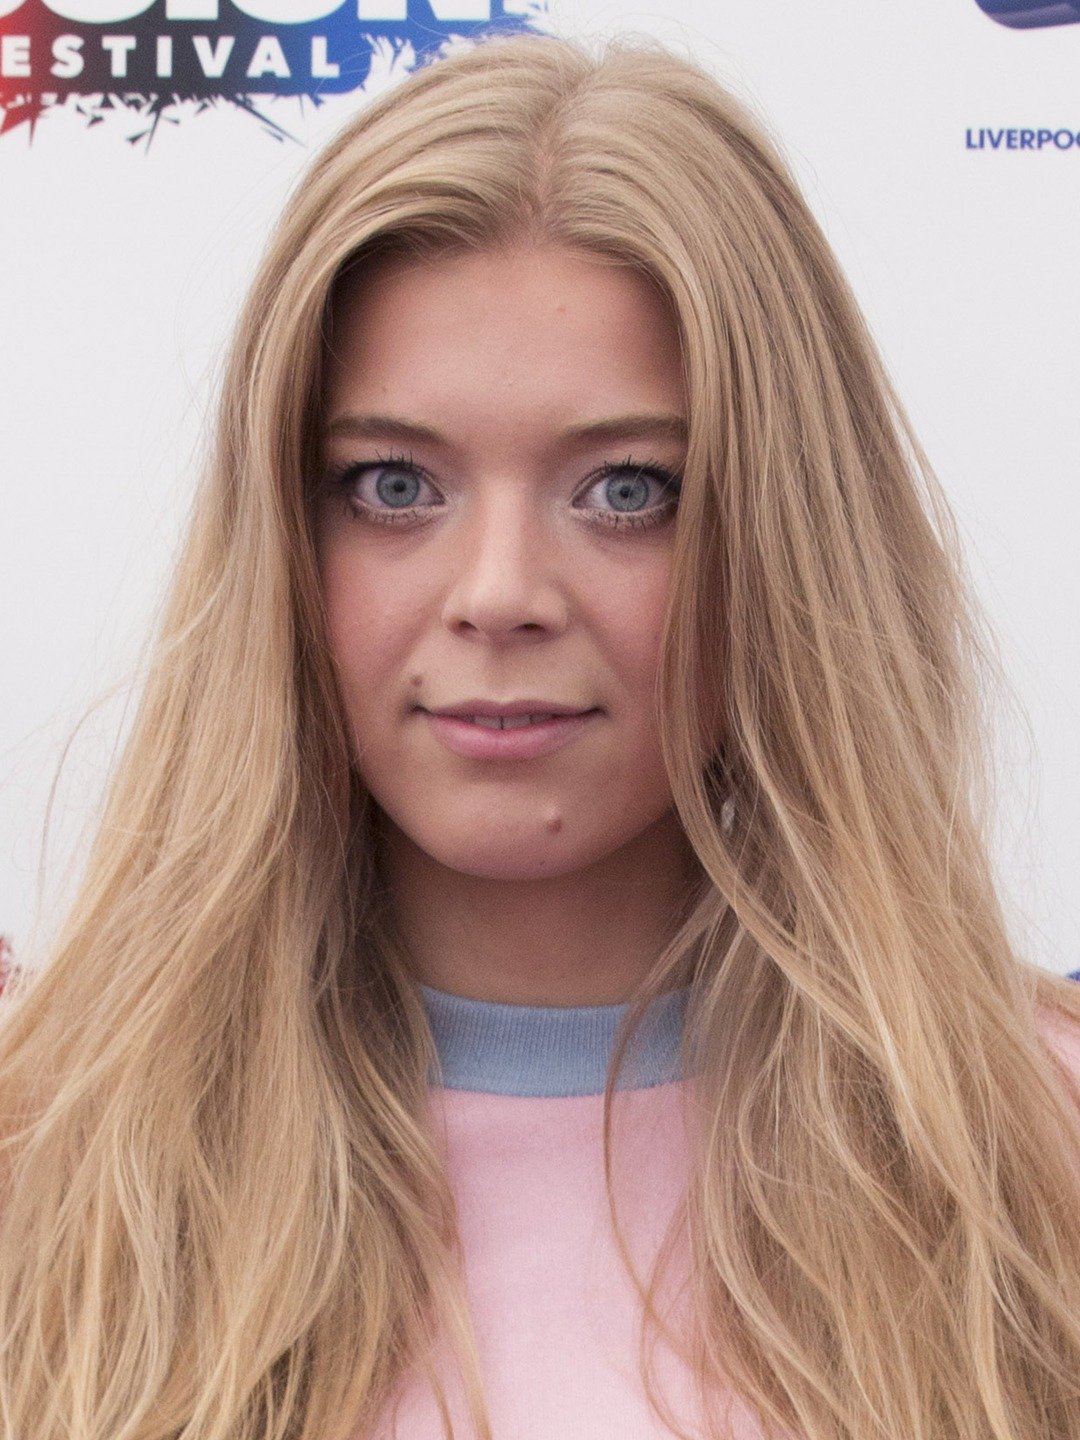 How tall is Becky Hill?